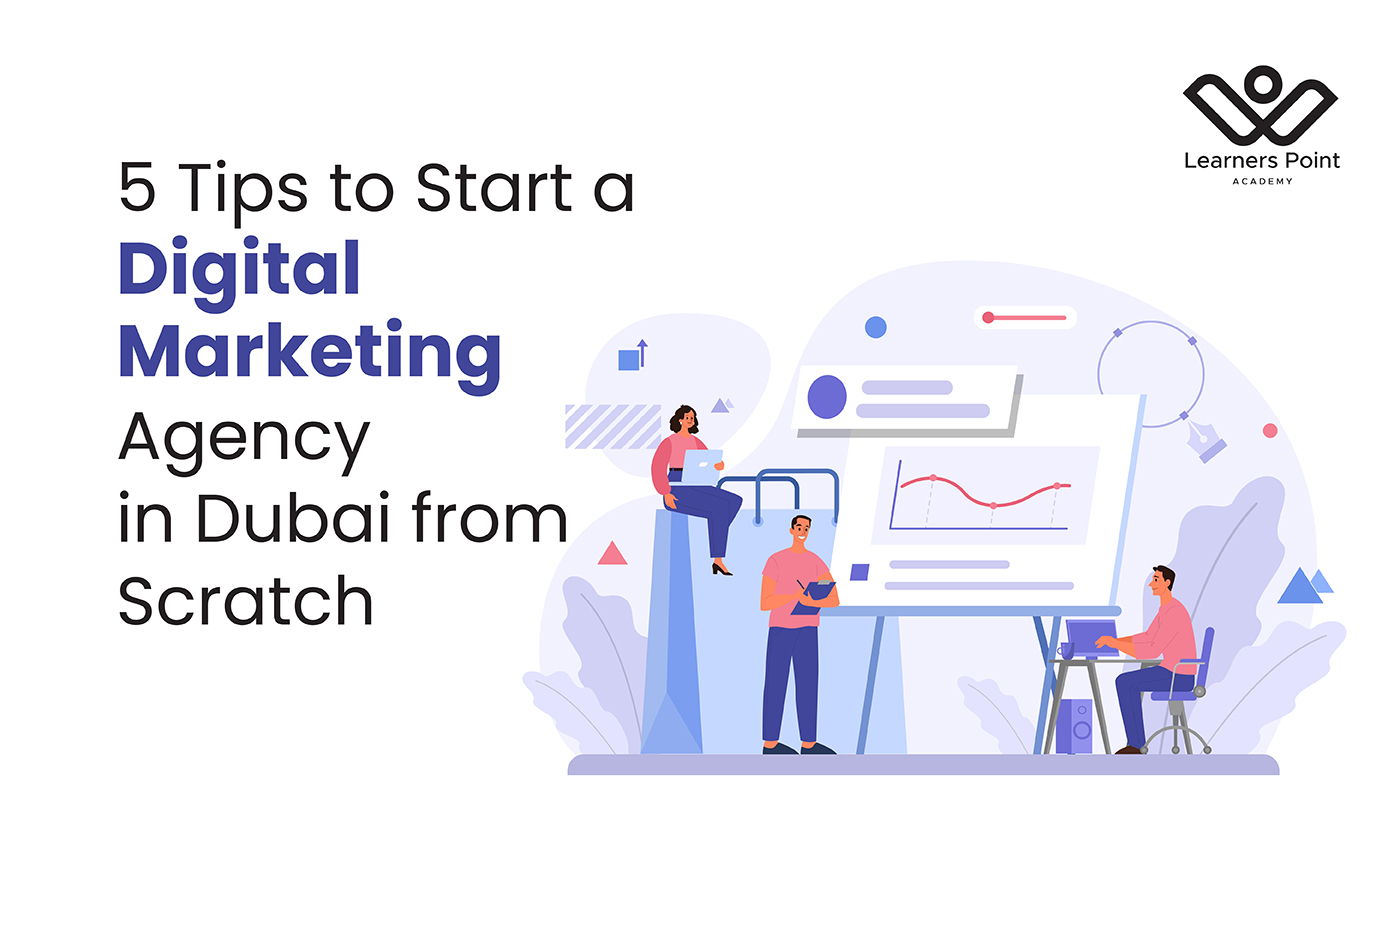 5 Tips to Start a Digital Marketing Agency in Dubai from Scratch